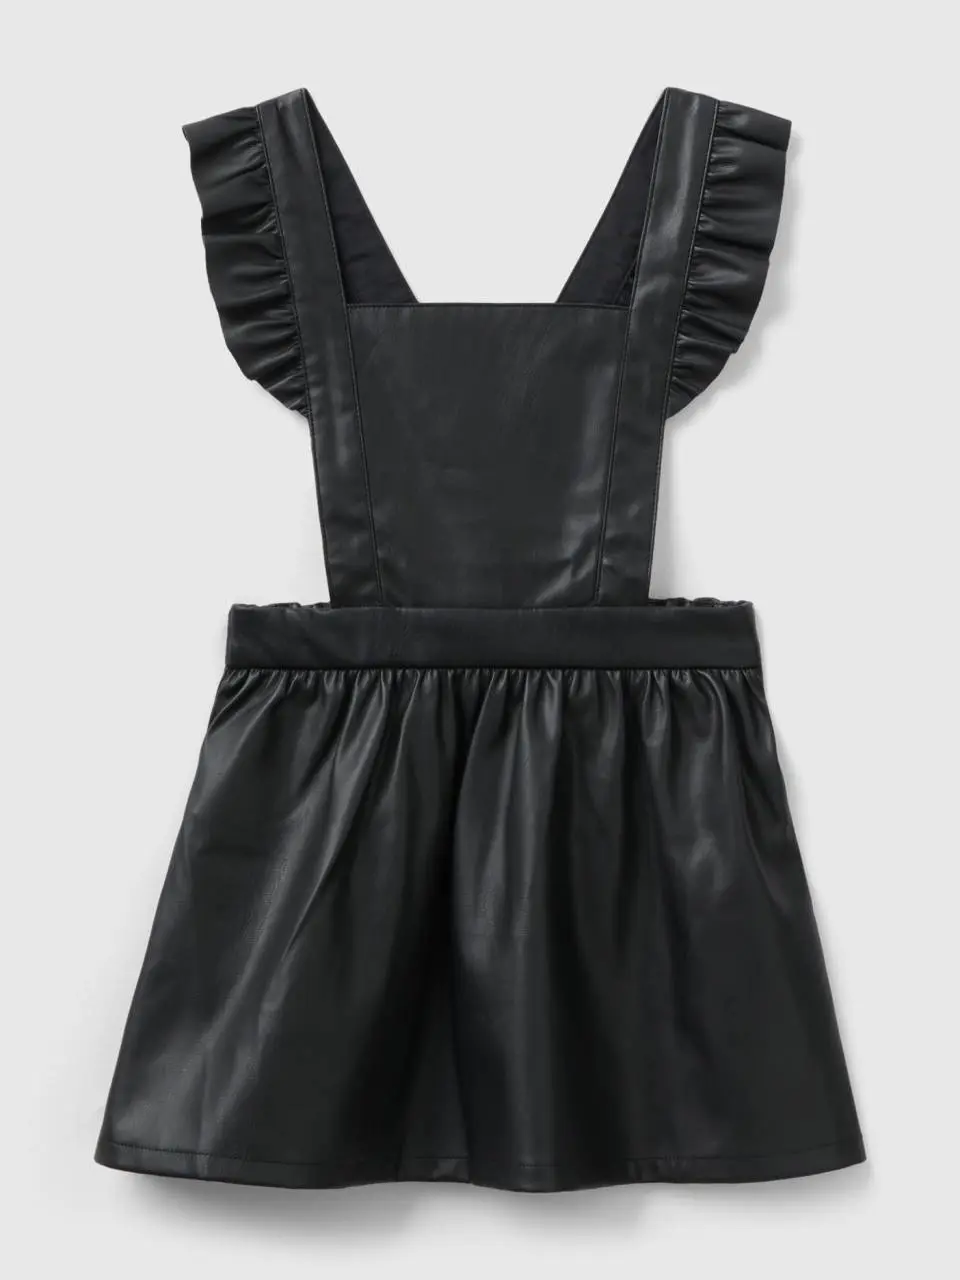 Benetton overall skirt in imitation leather fabric. 1